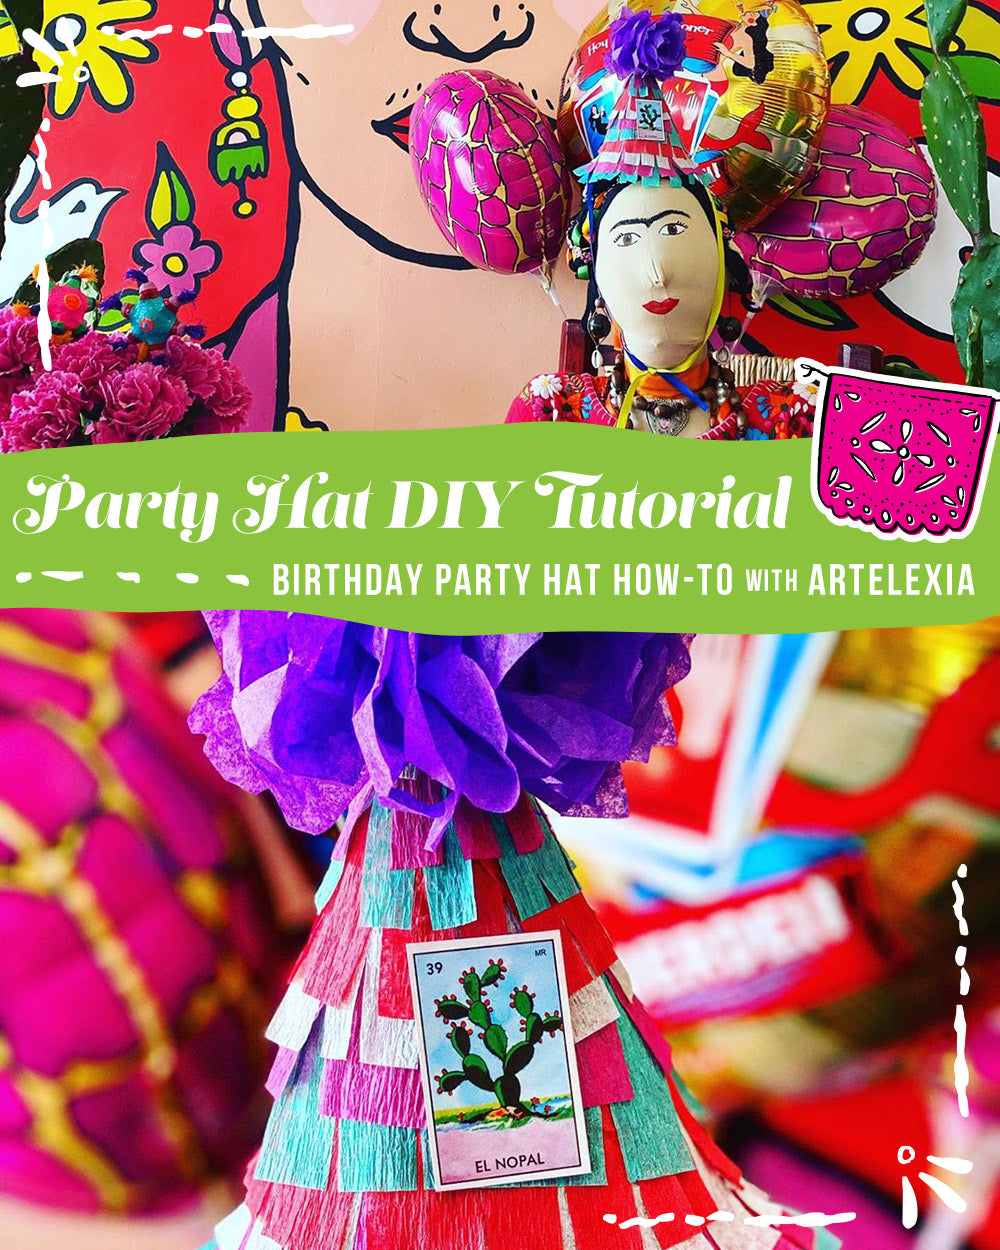 Birthday Party Hat Tutorial with Template by Artelexia